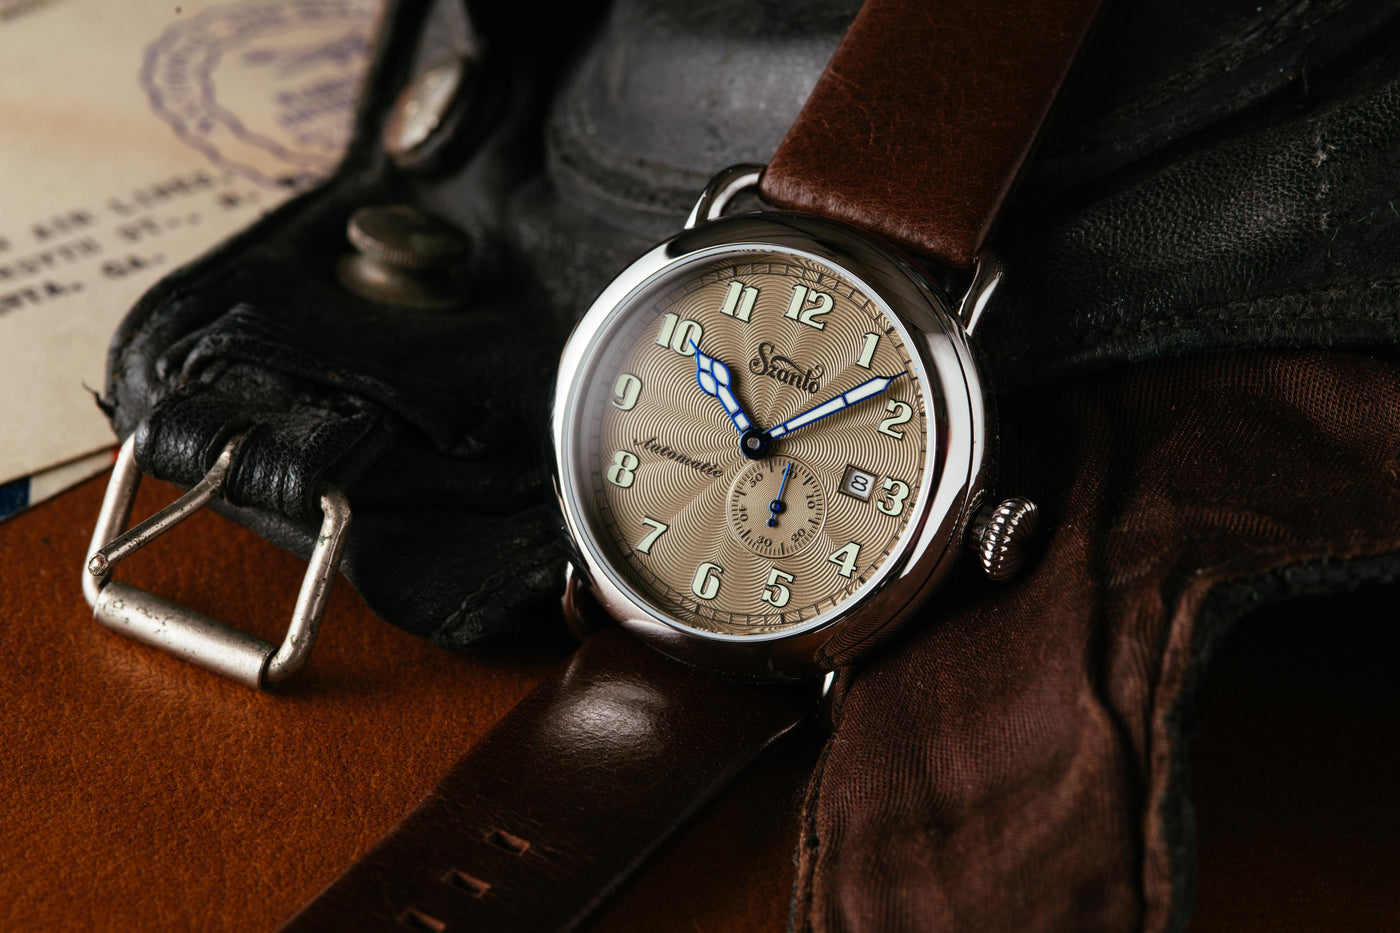 Szanto Automatic Officer Classic Round 6304